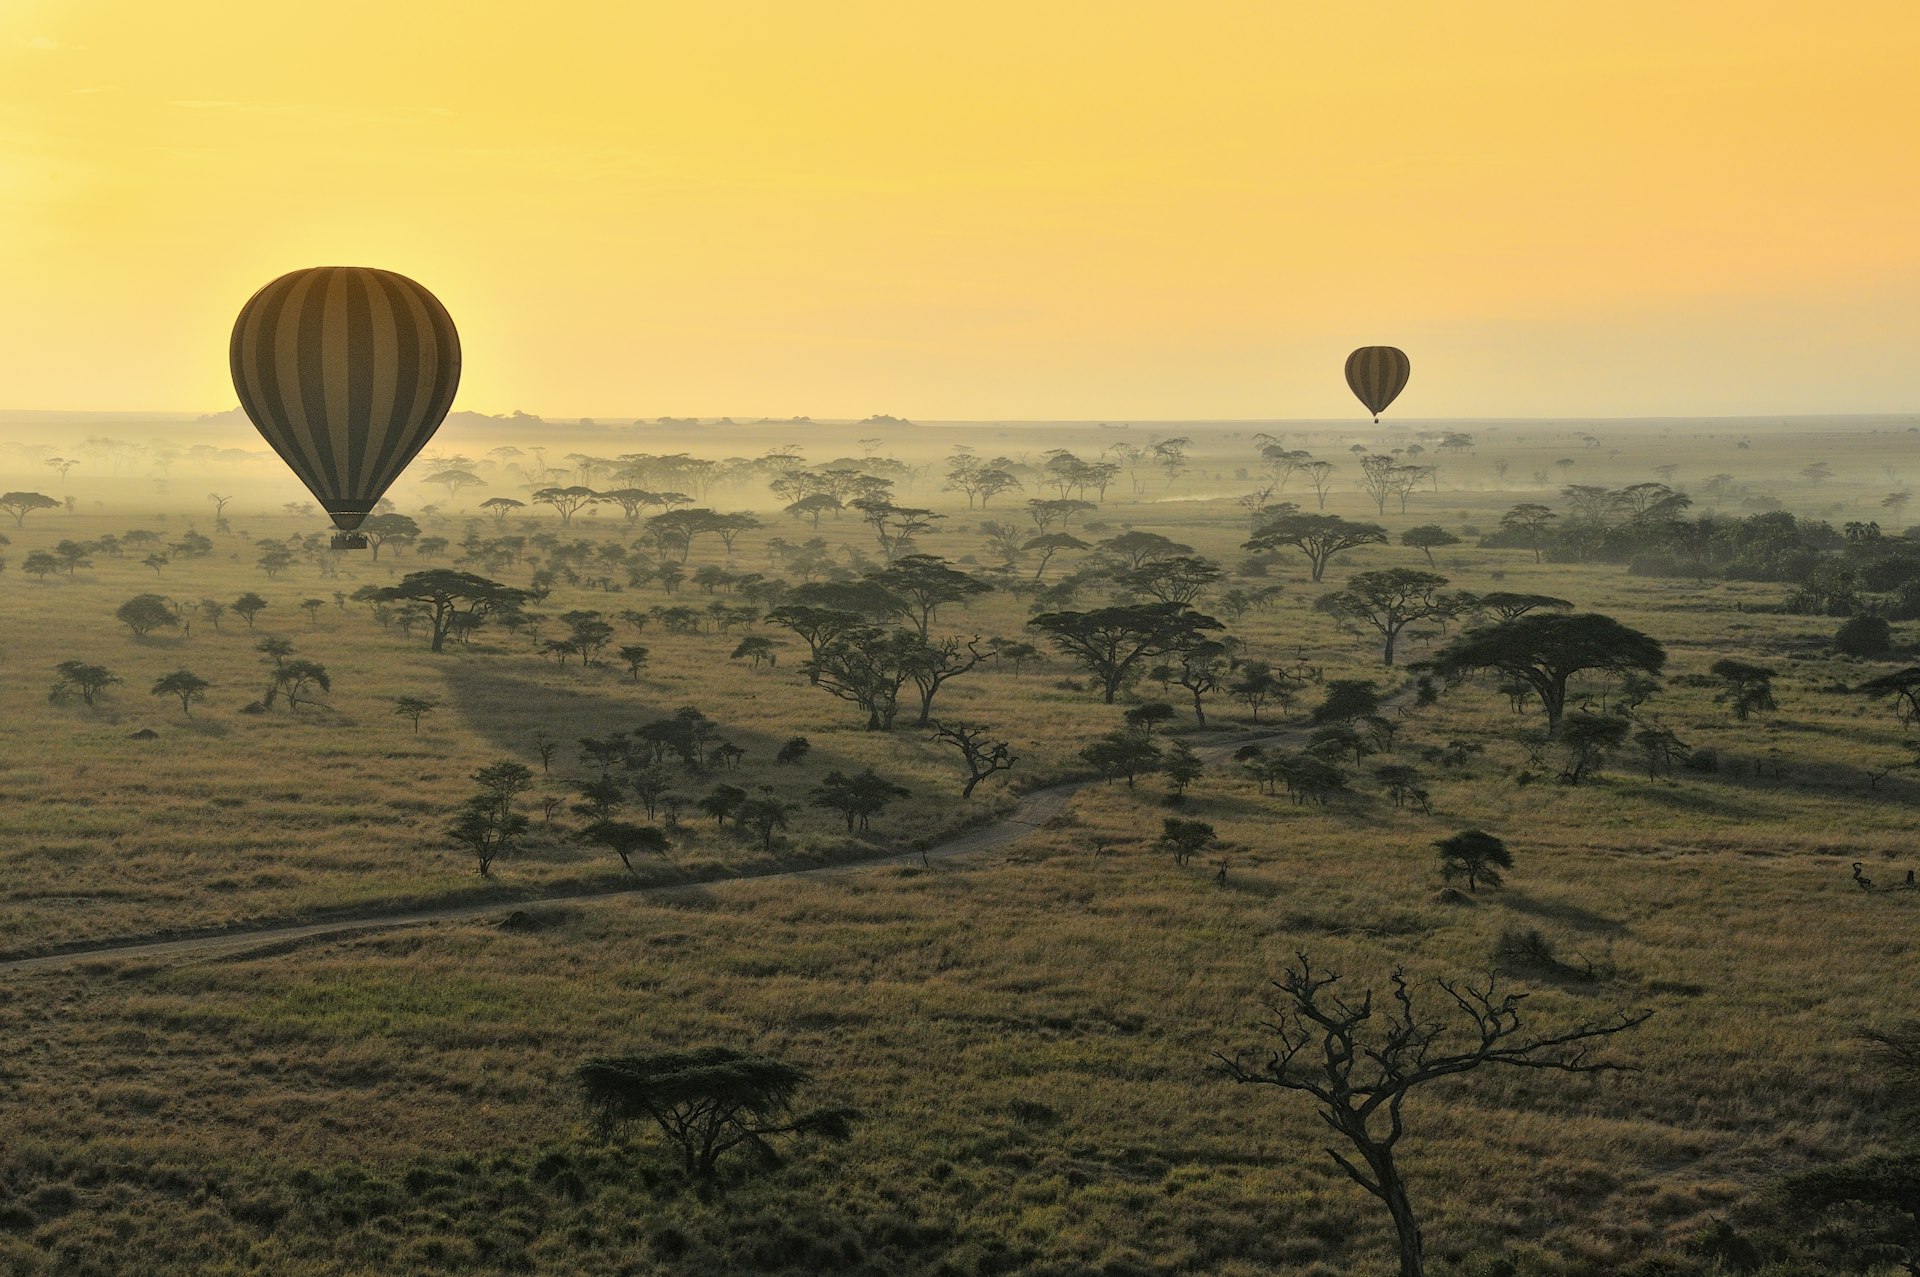 Two hot-air balloons float above the grasslands at sunrise